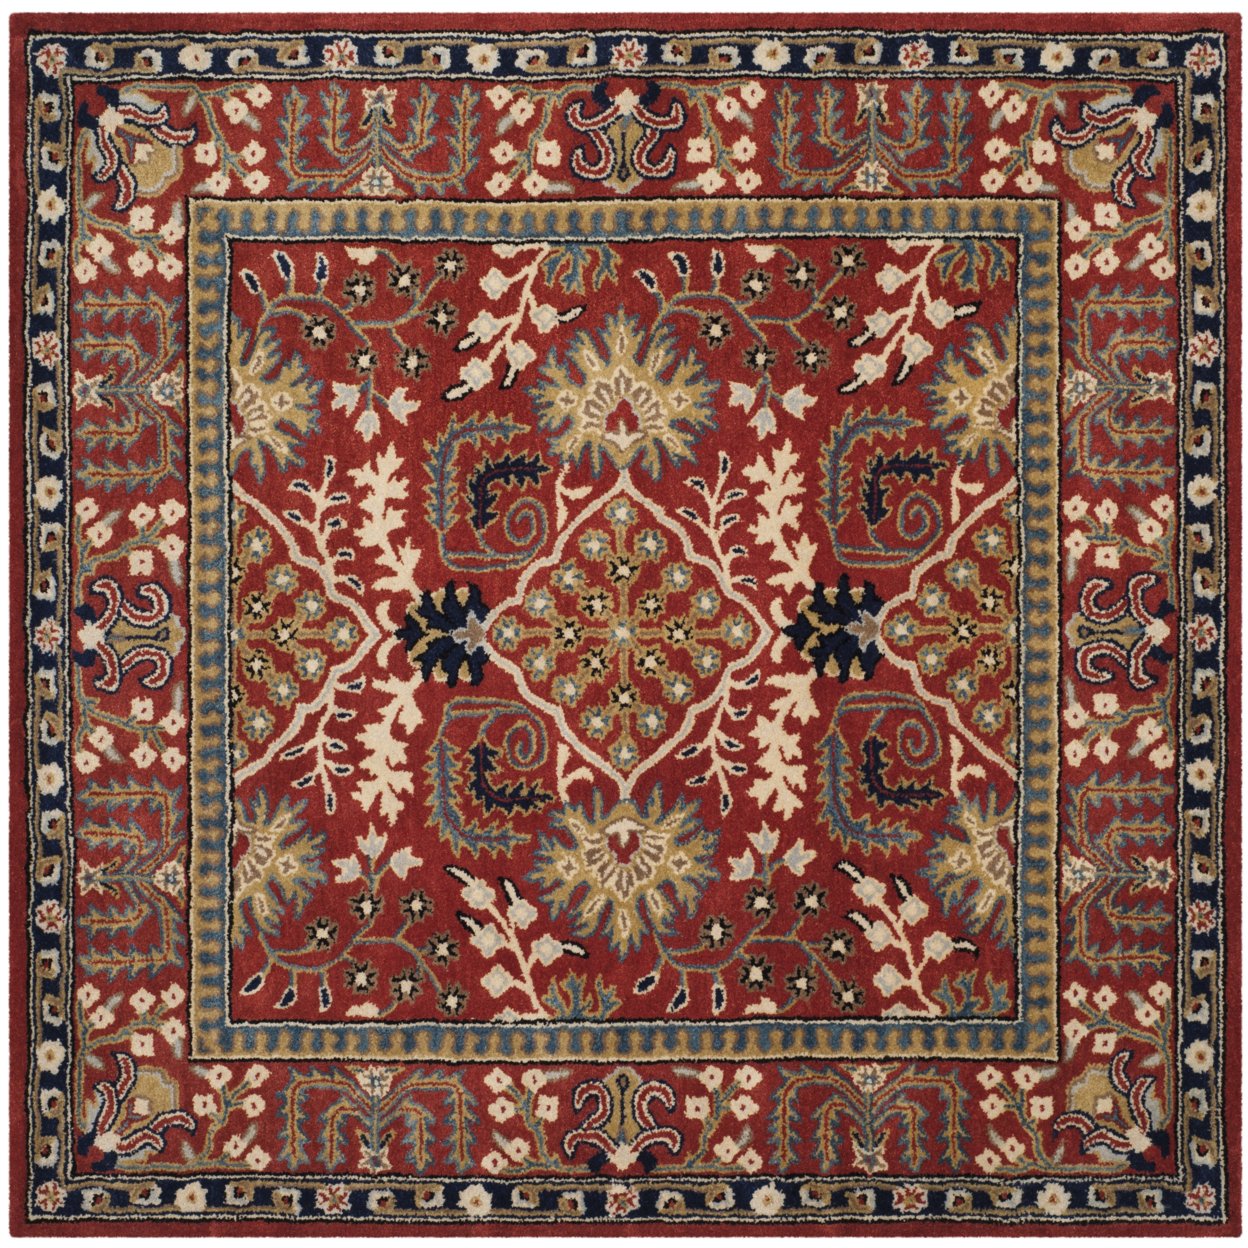 SAFAVIEH Antiquity AT64A Handmade Red / Multi Rug - 6' Square